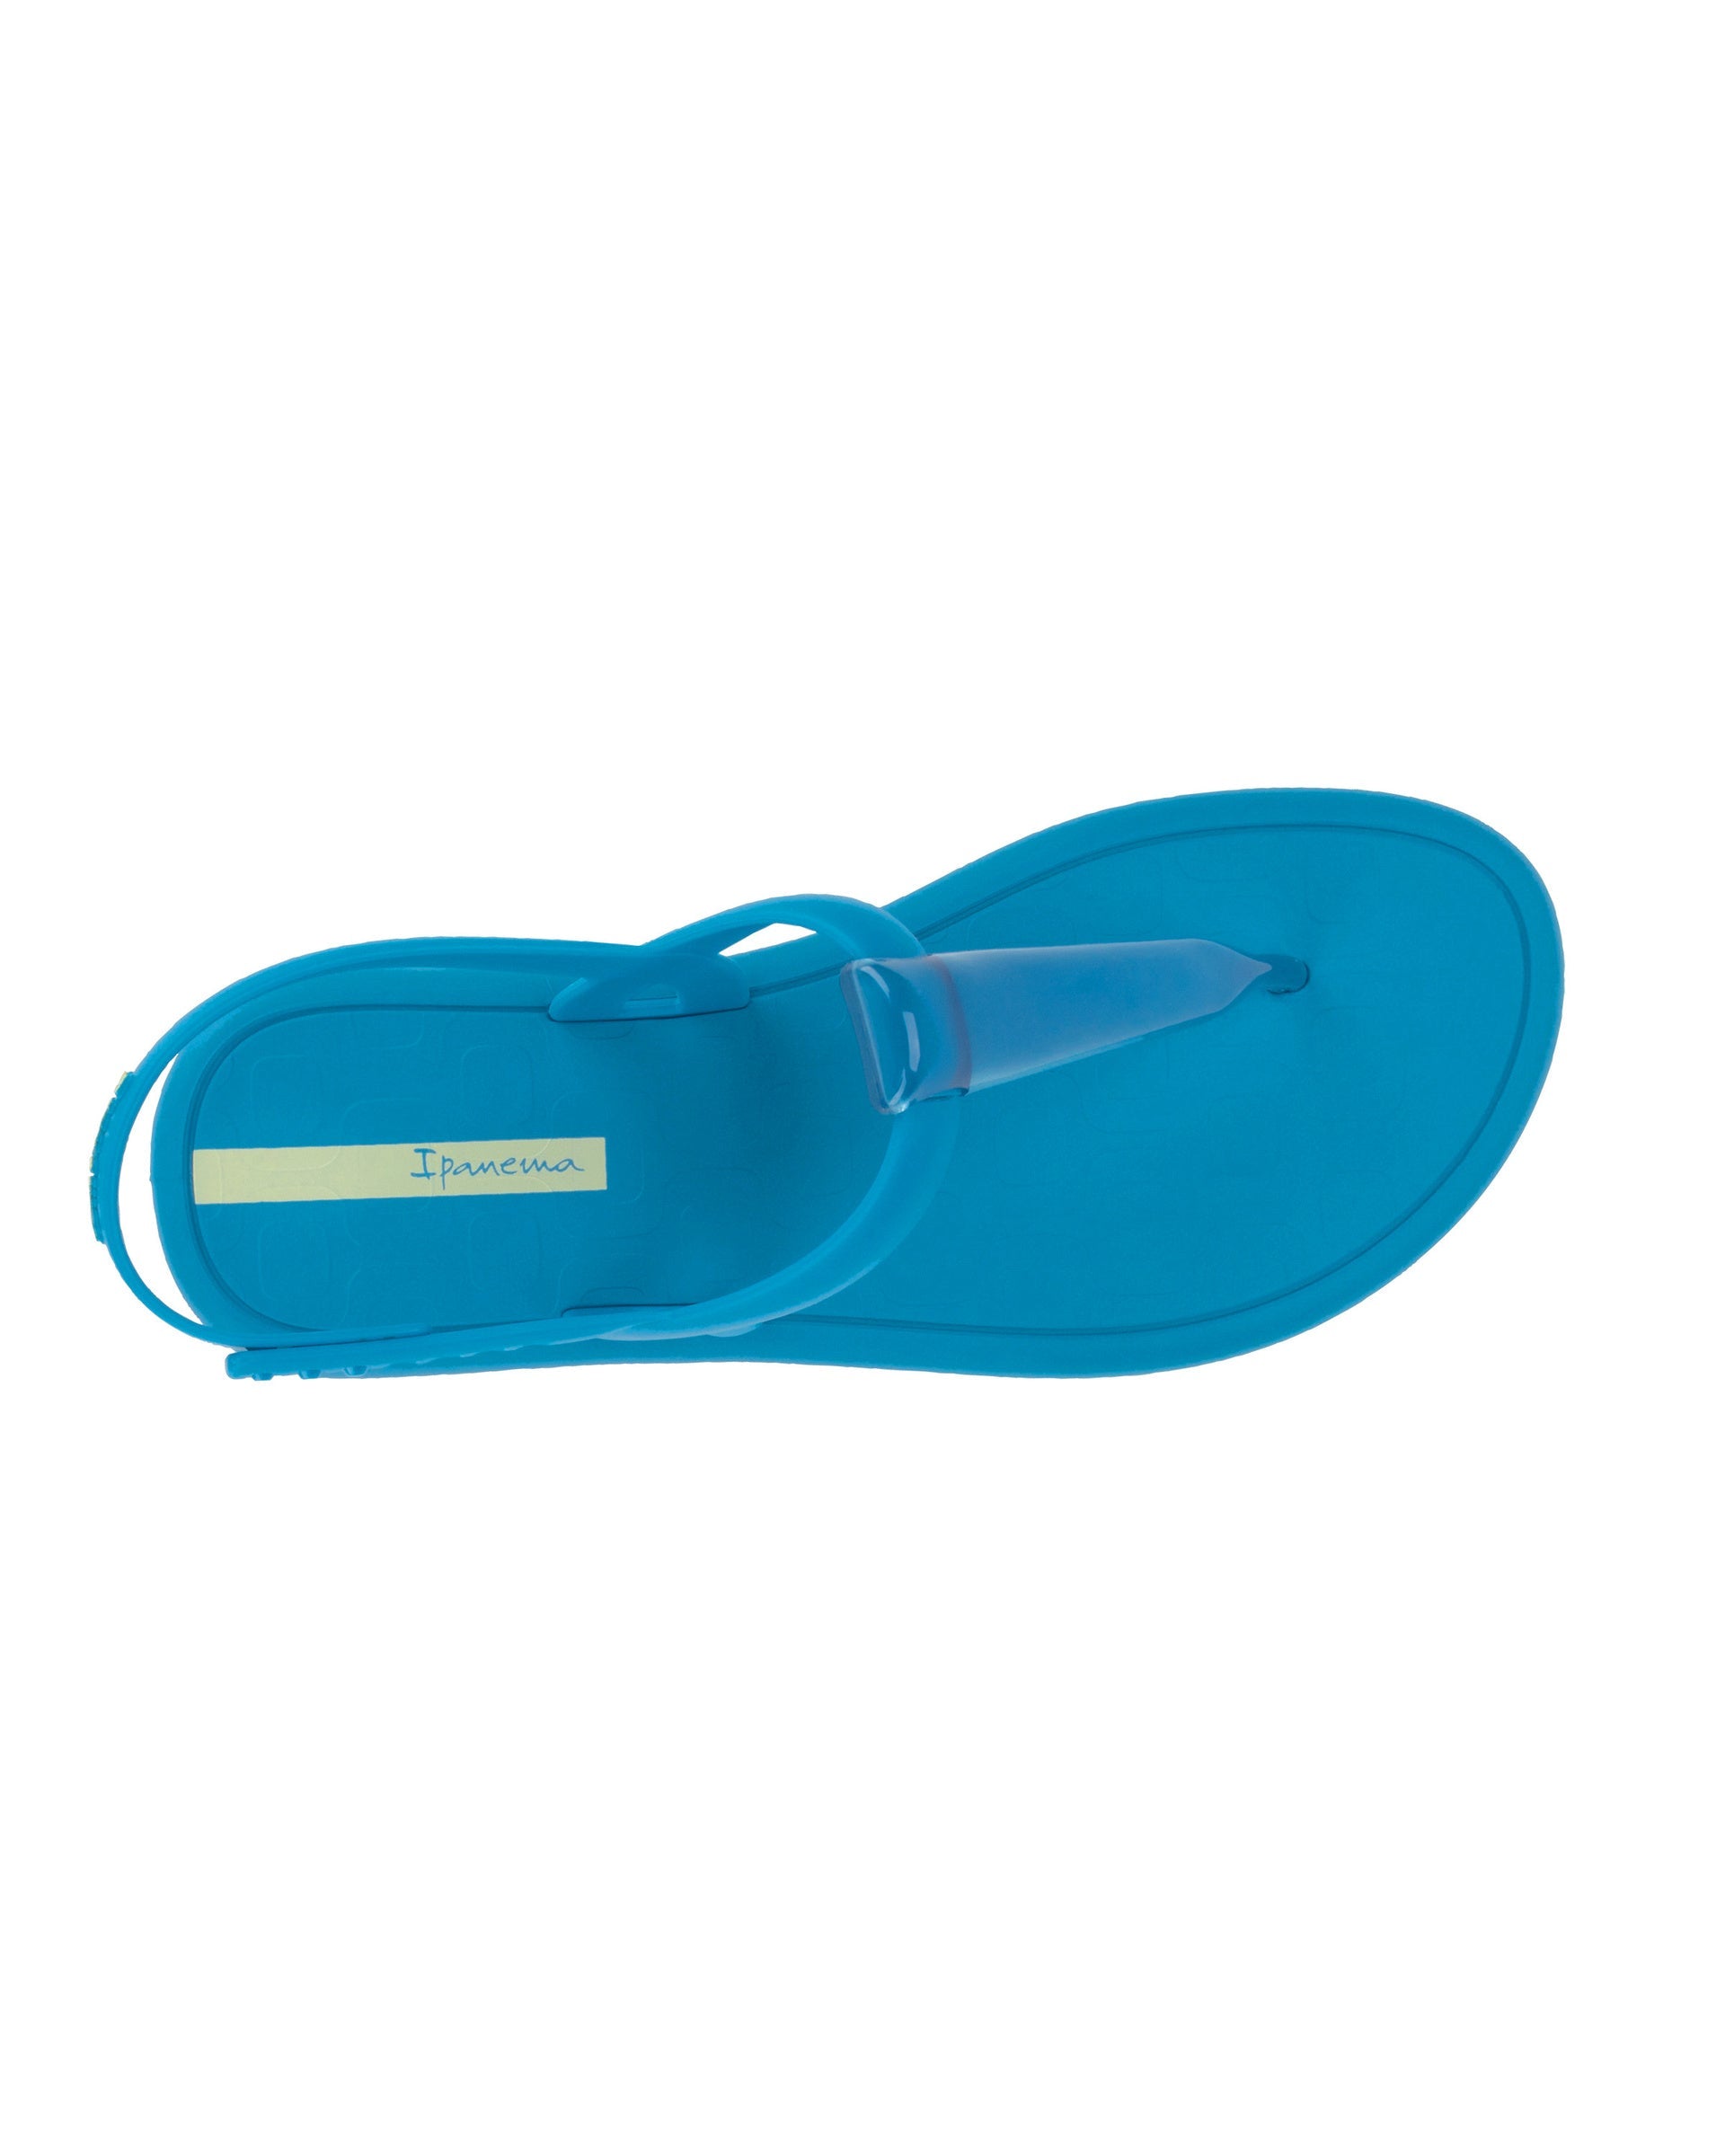 Top view of a blue Ipanema Glossy women's t-strap sandal.